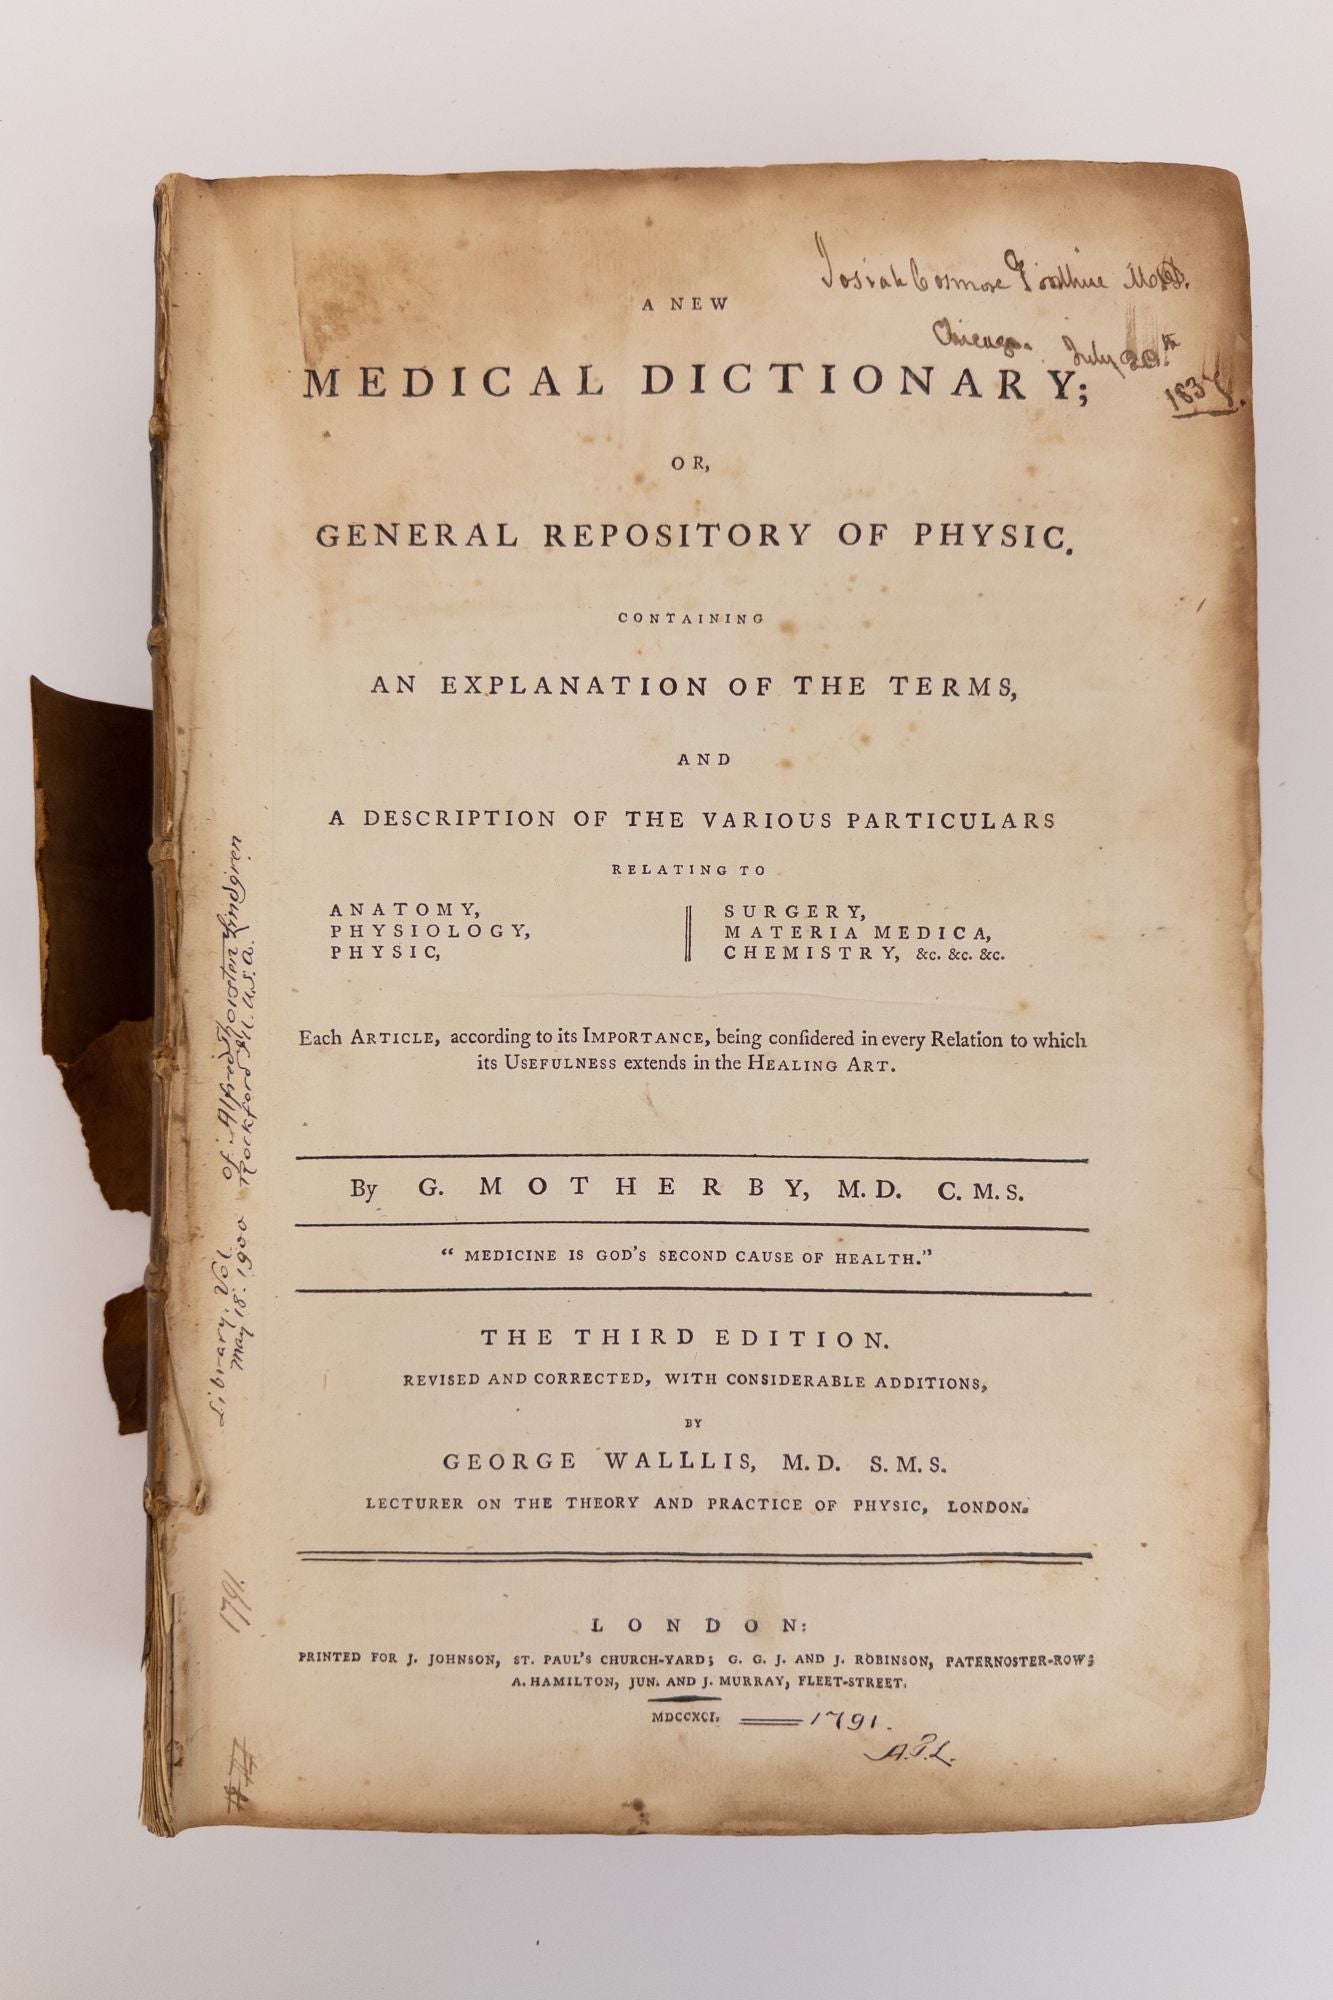 Product Image for A NEW MEDICAL DICTIONARY; OR, GENERAL REPOSITORY OF PHYSIC